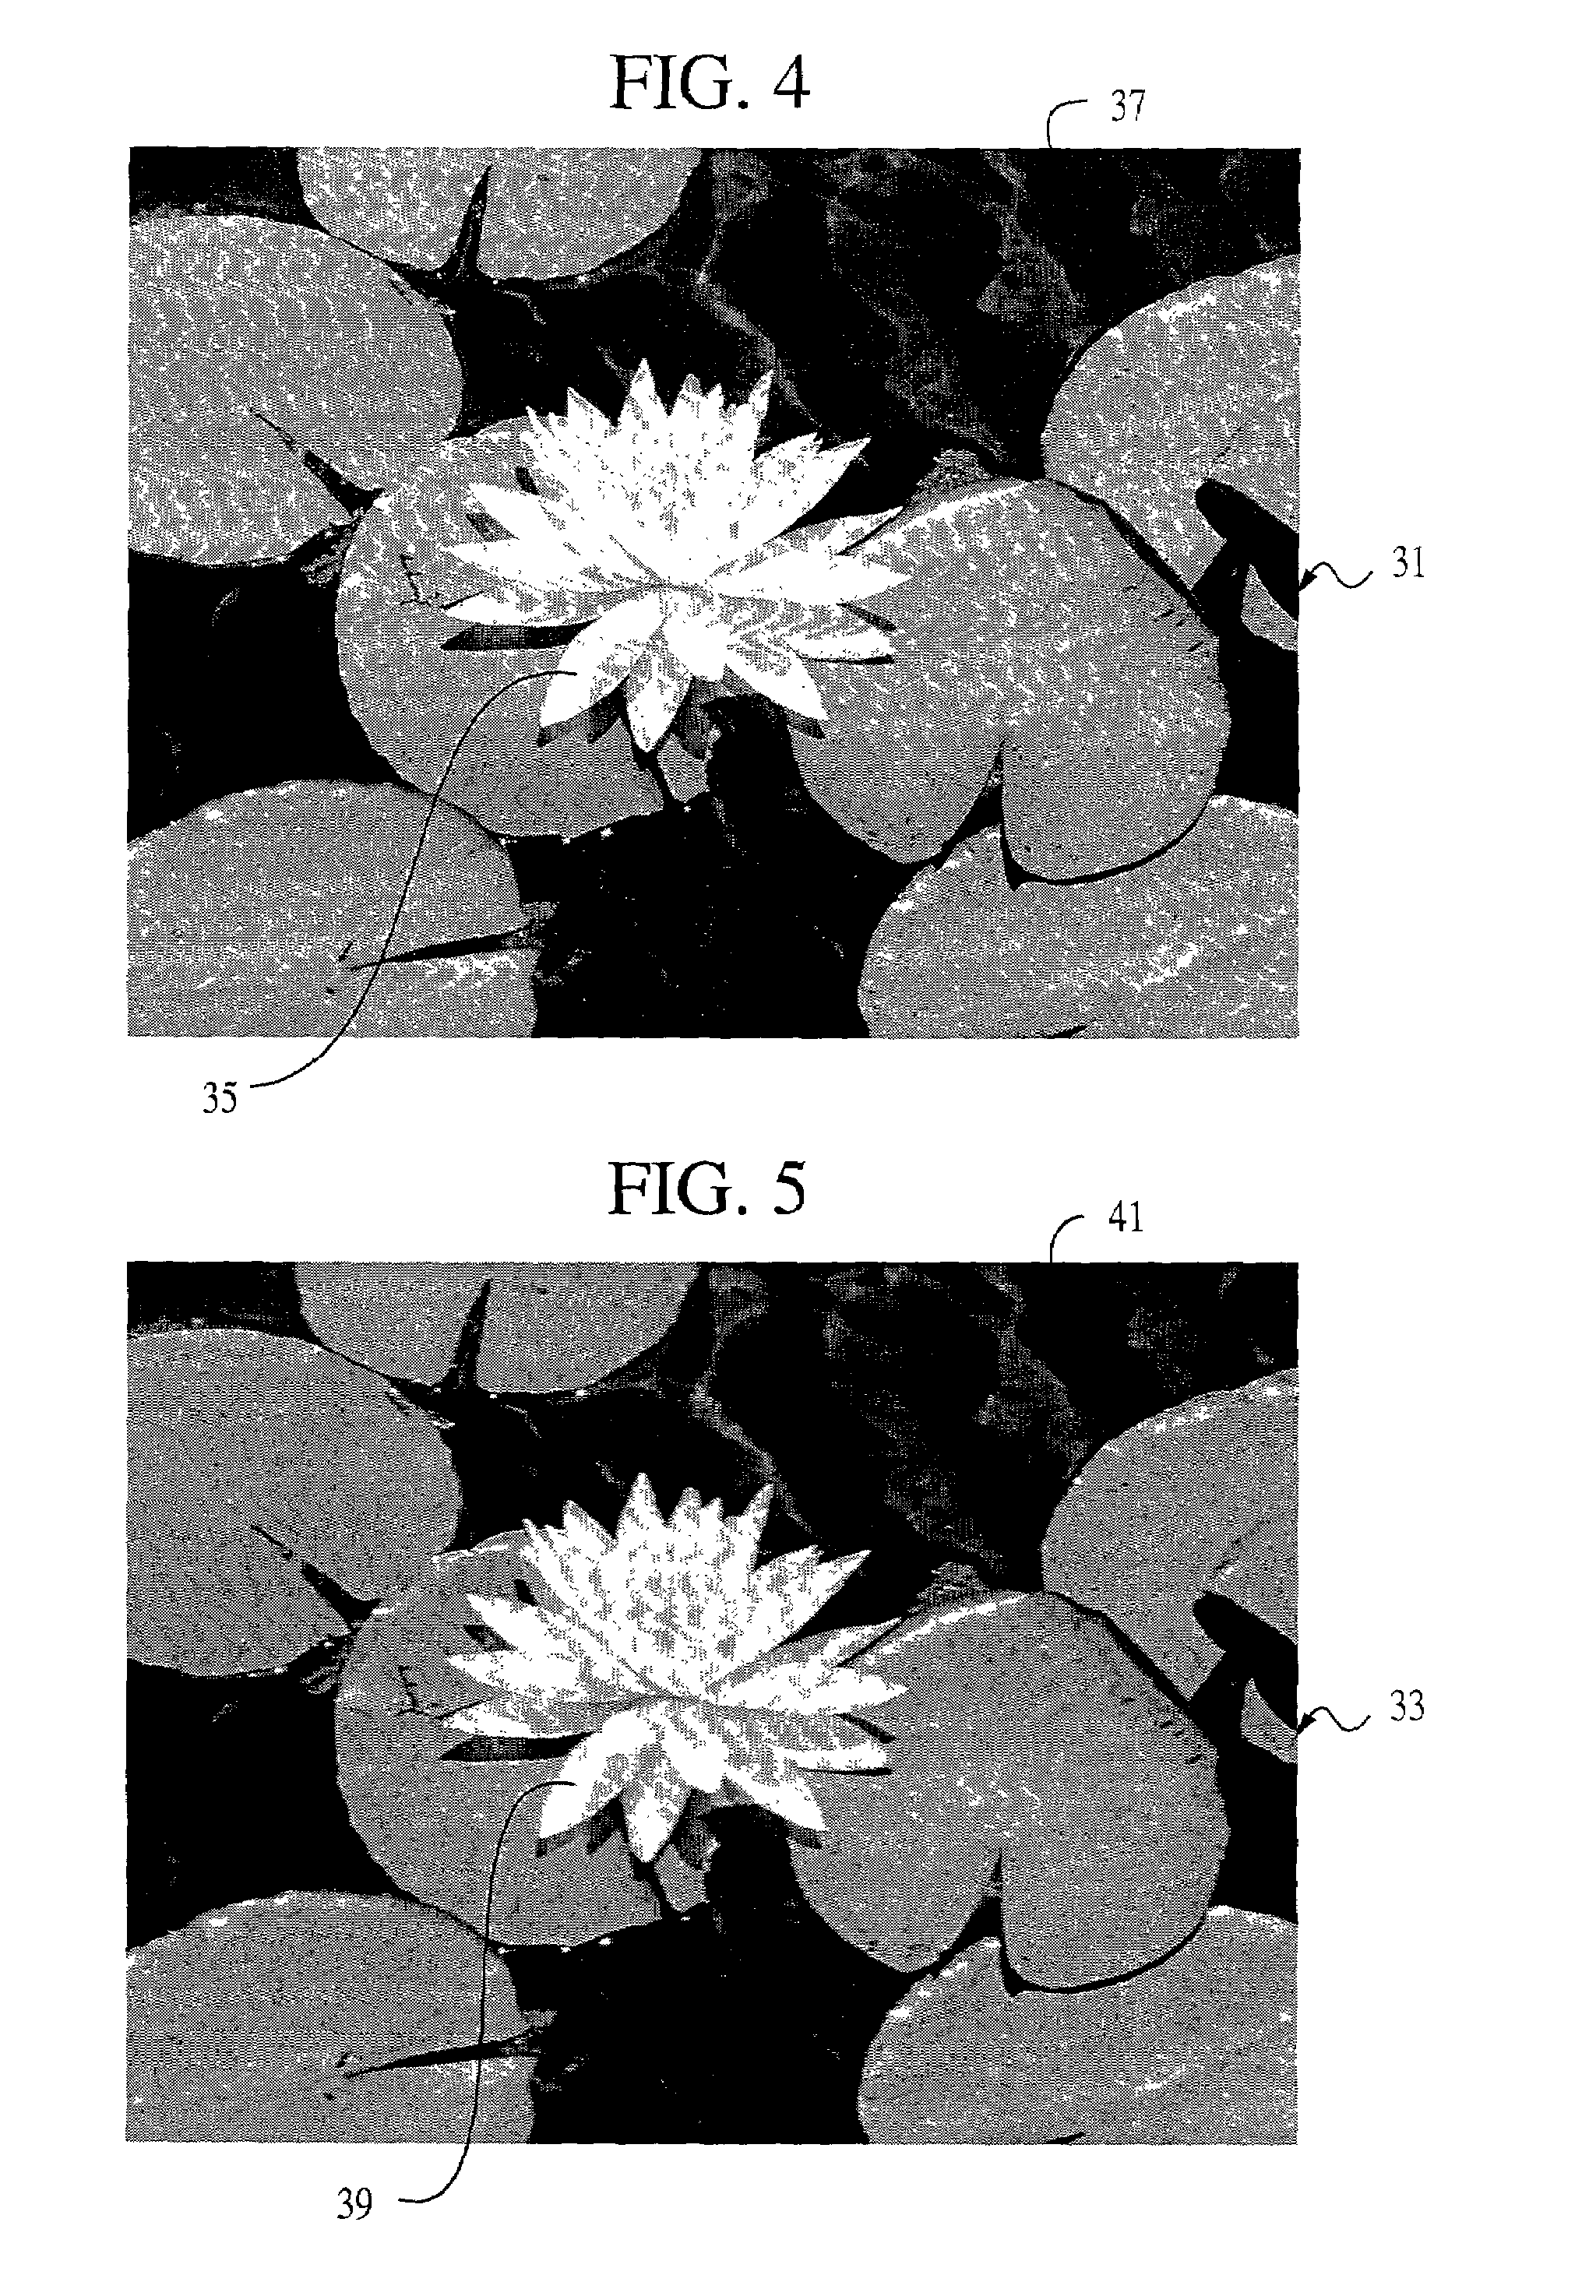 Method and system for assessing the photo quality of a captured image in a digital still camera